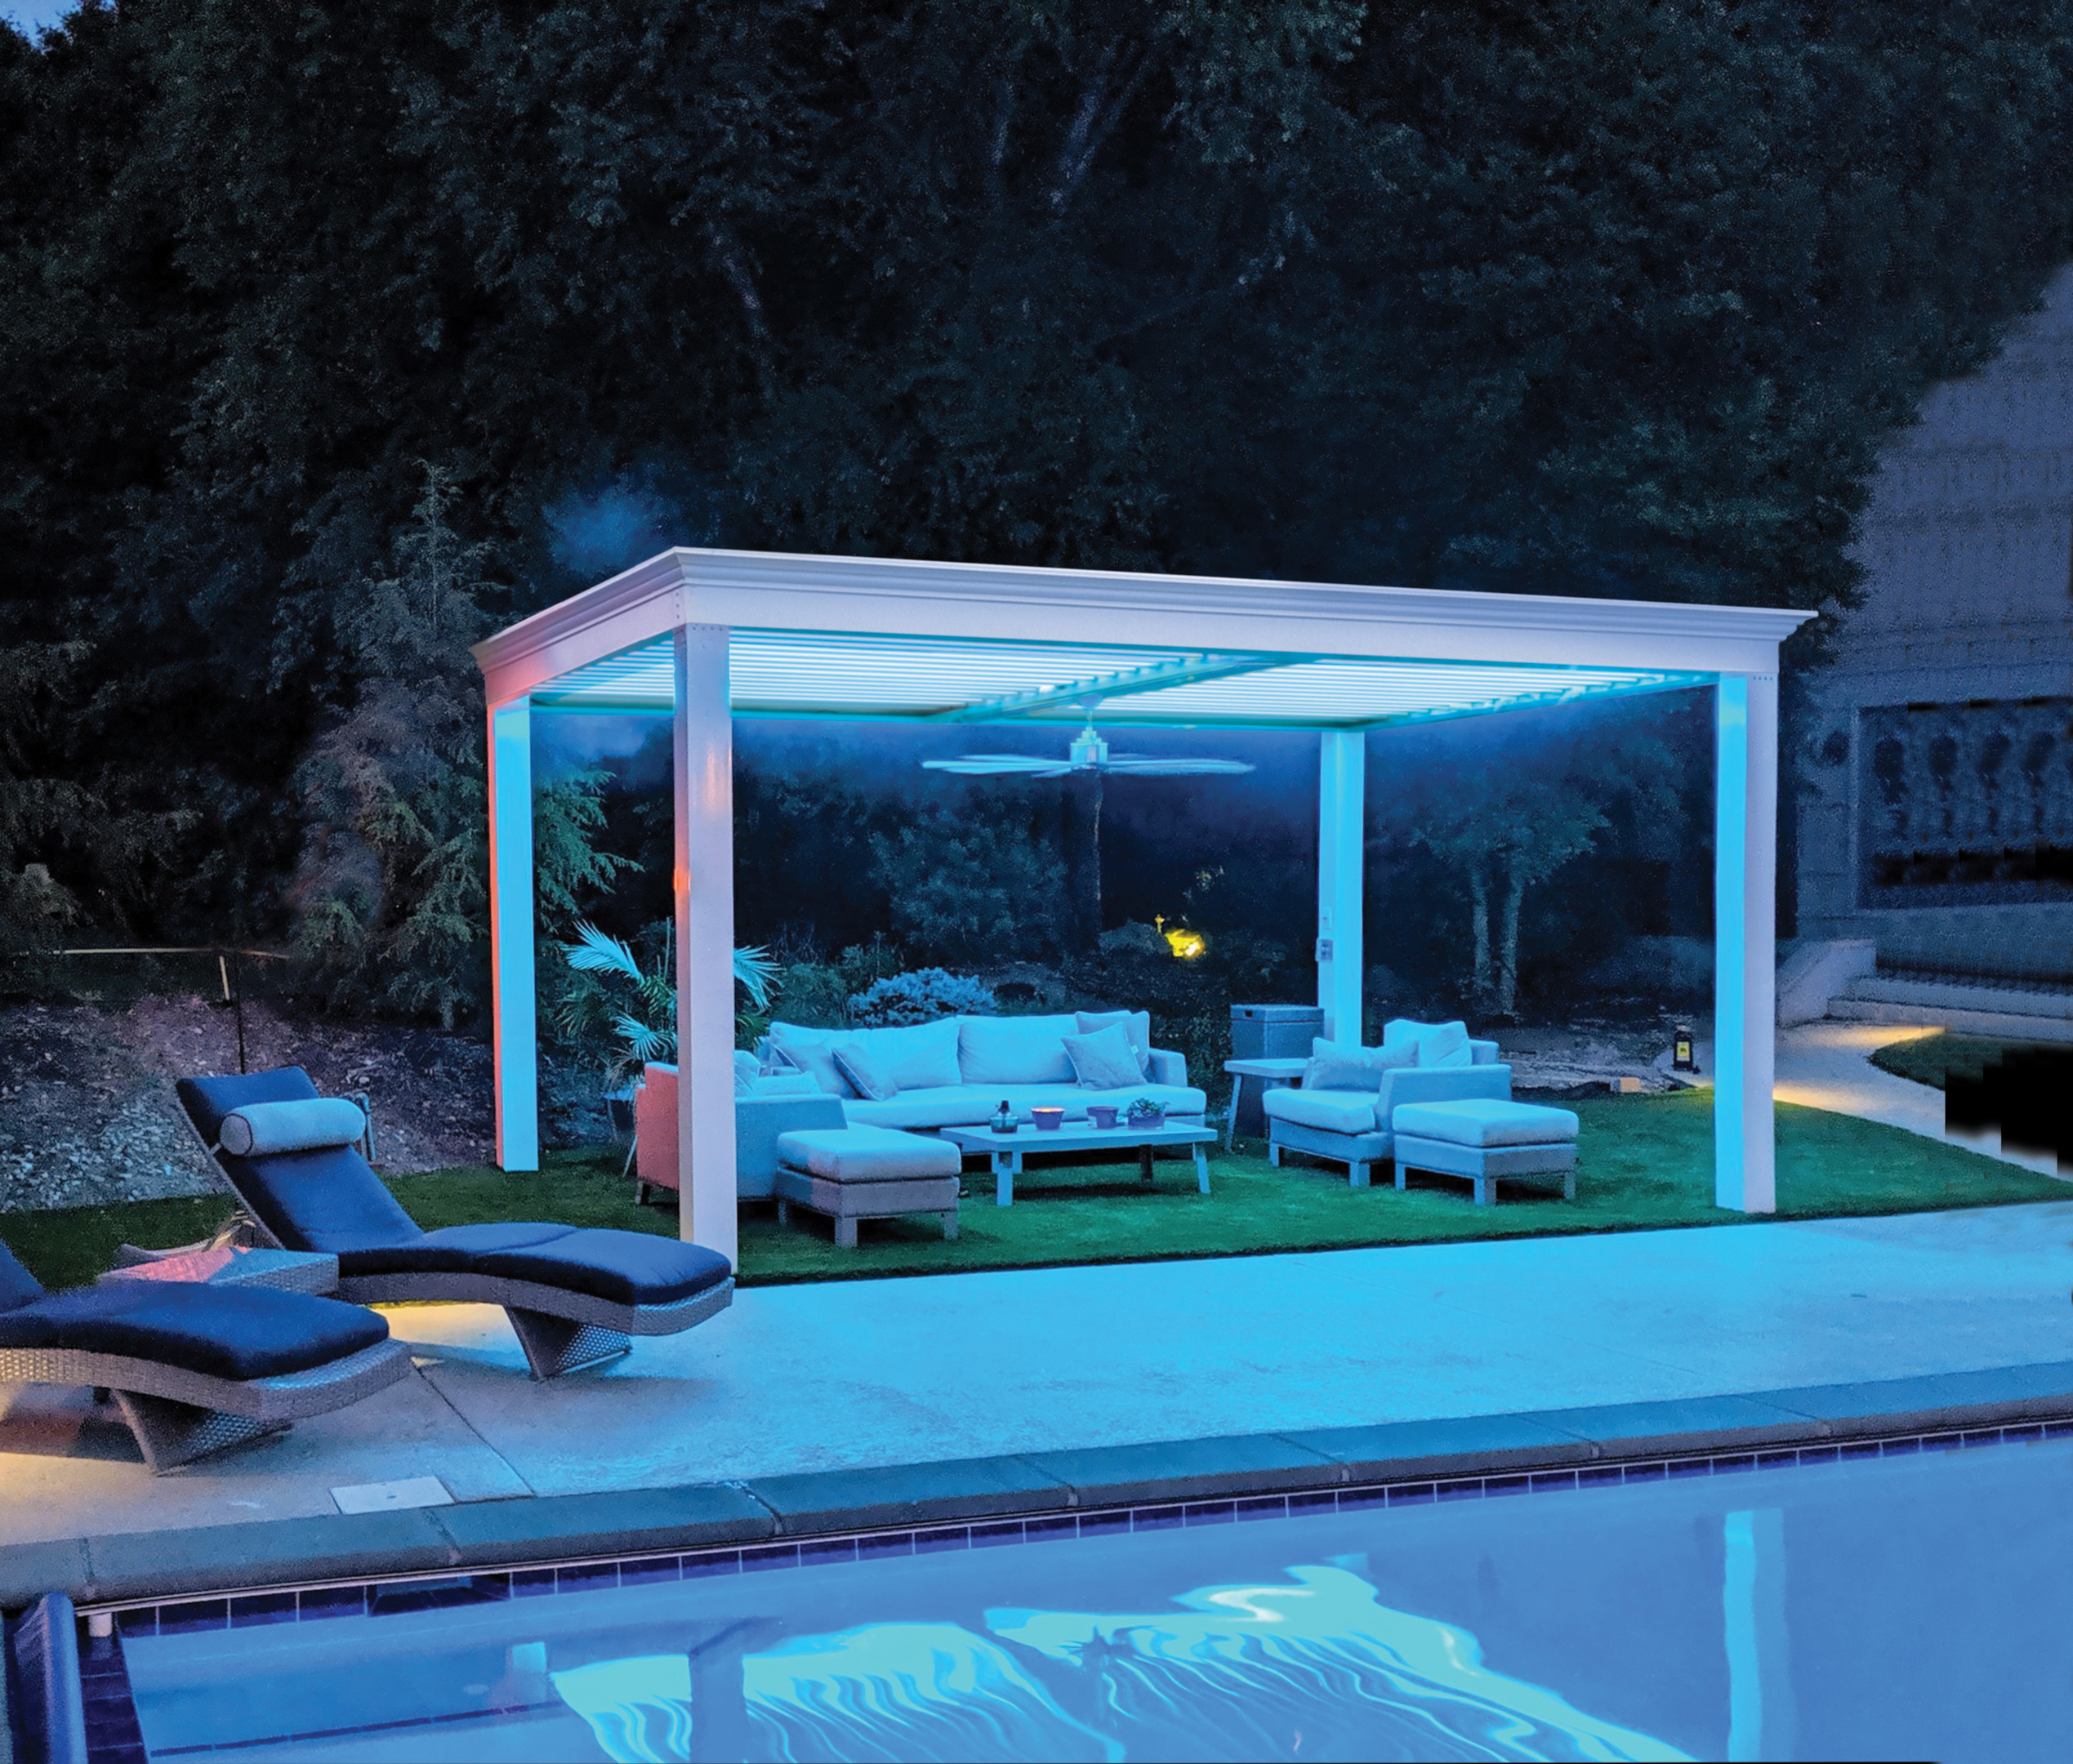 Pergola using led lighting near roof to elevate their outdoor living space.